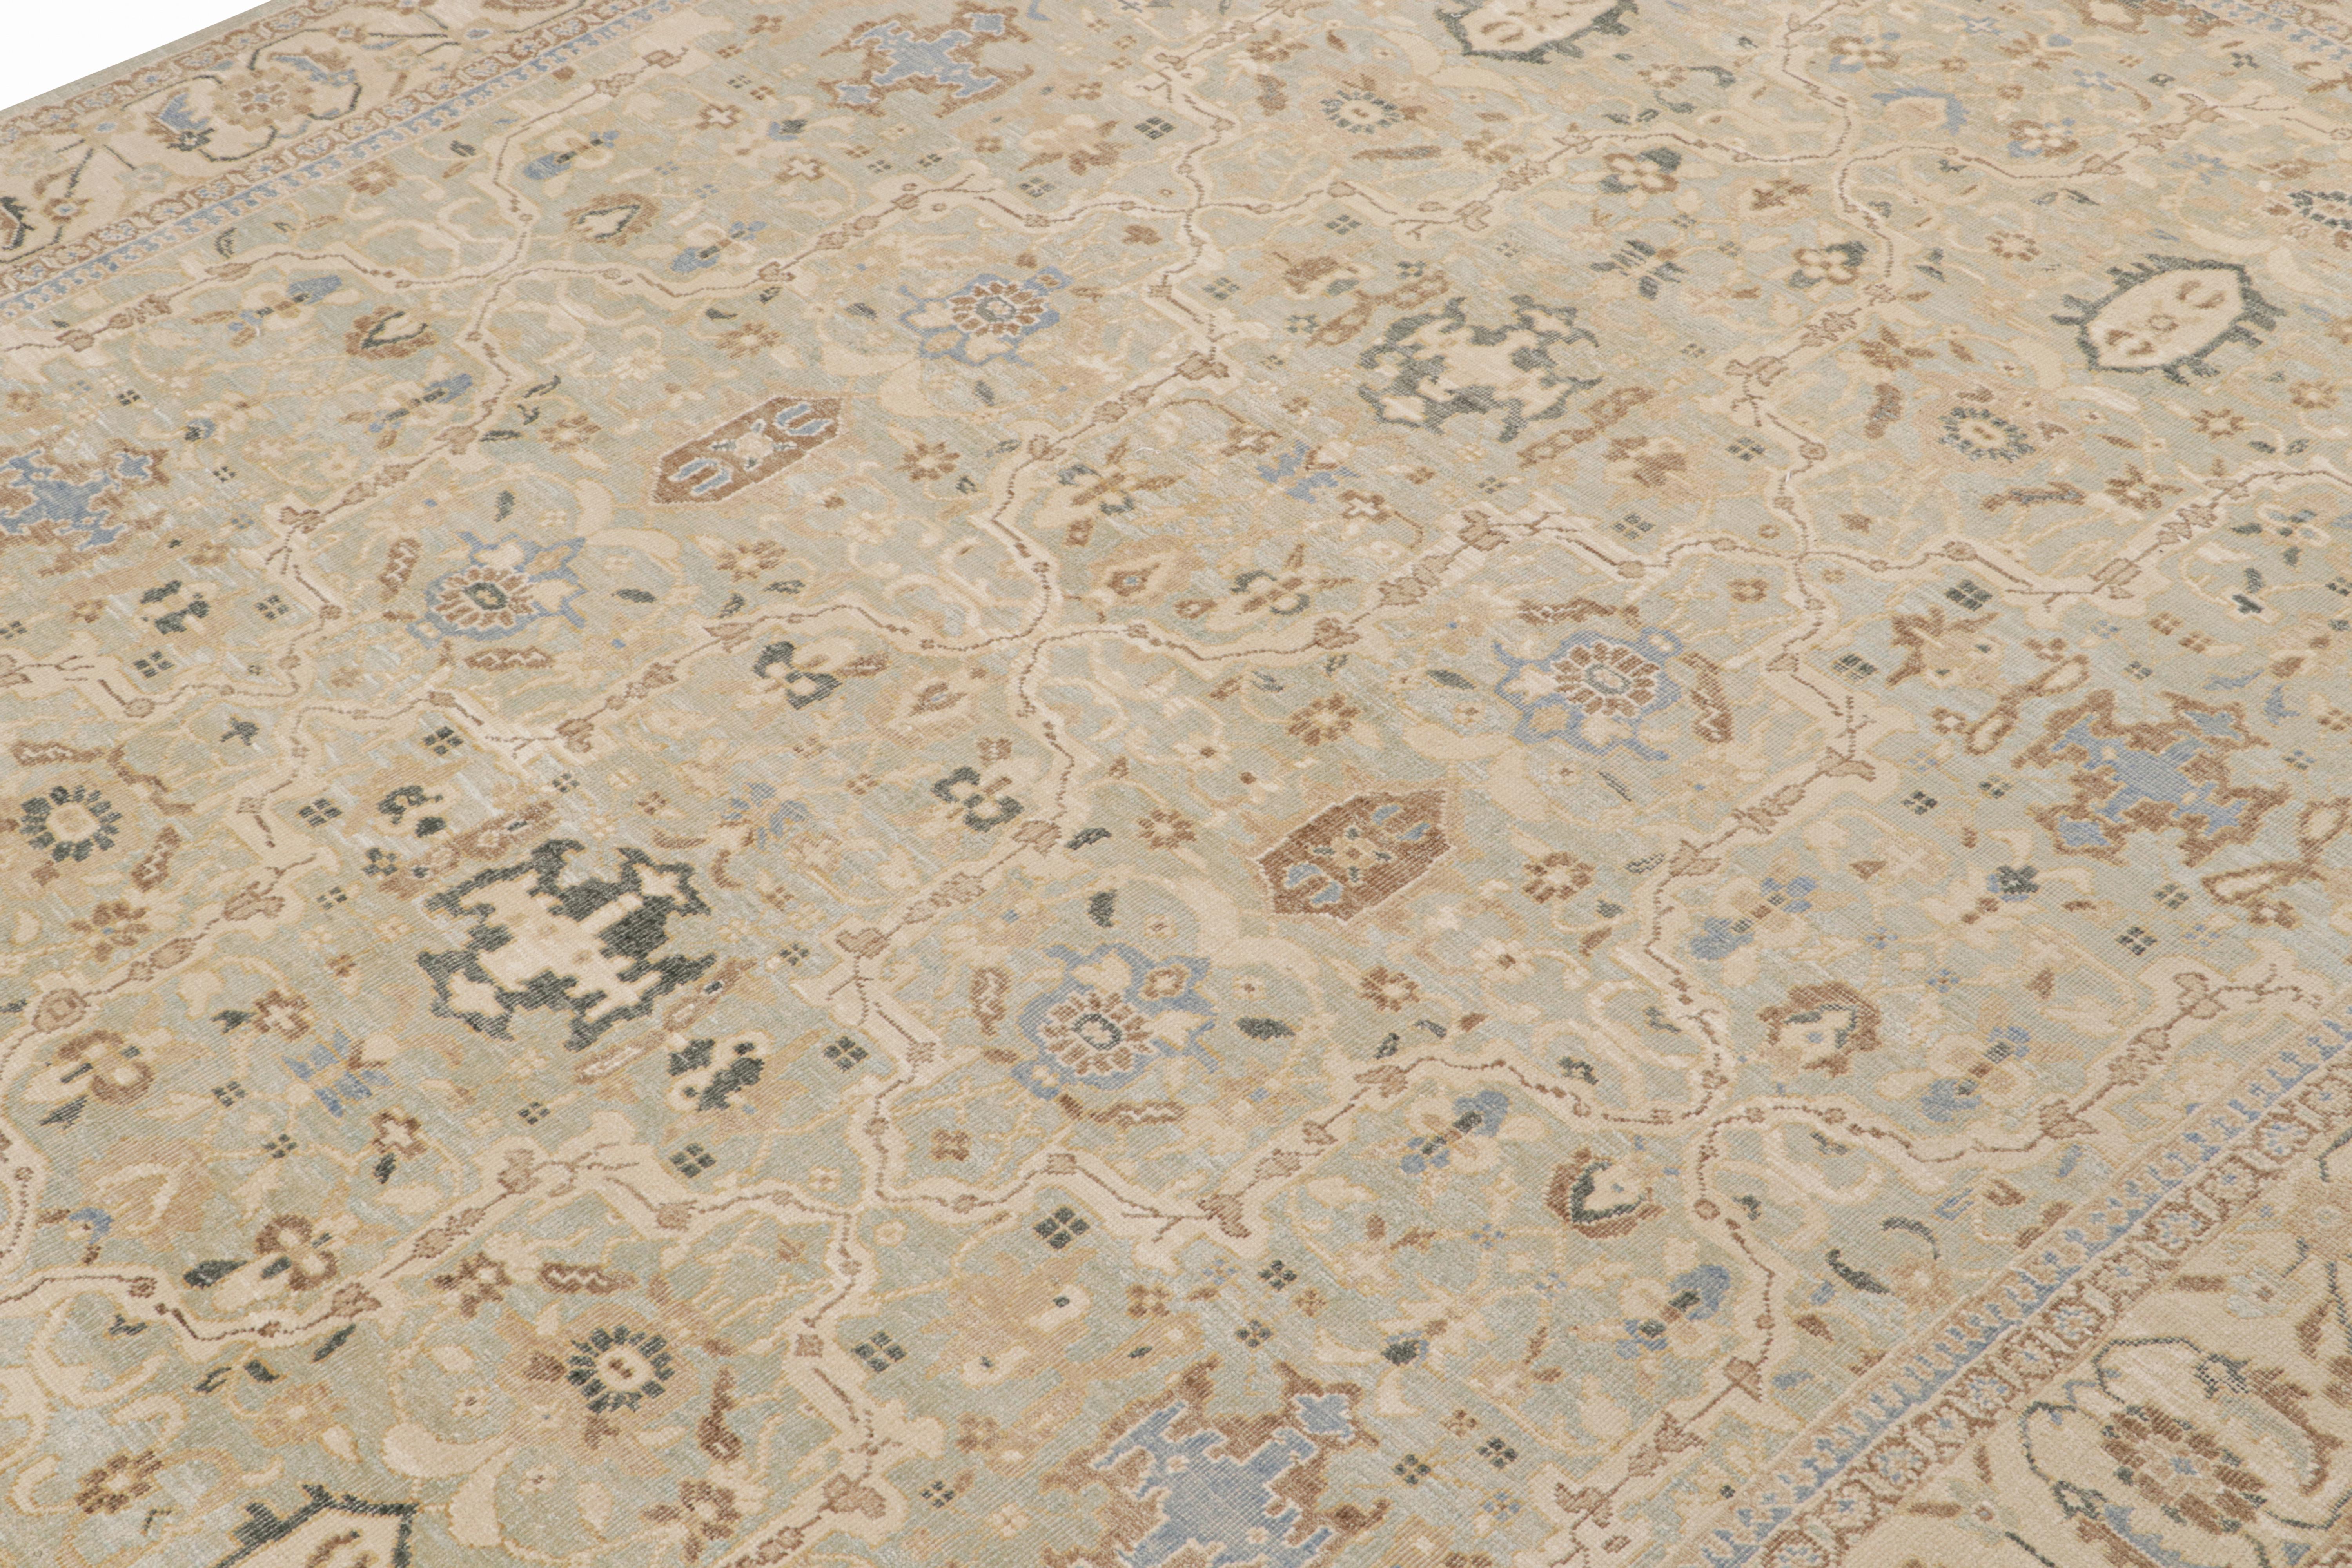 Hand-Knotted Rug & Kilim’s Oushak Style Rug in Blue and Beige-Brown Floral Patterns For Sale